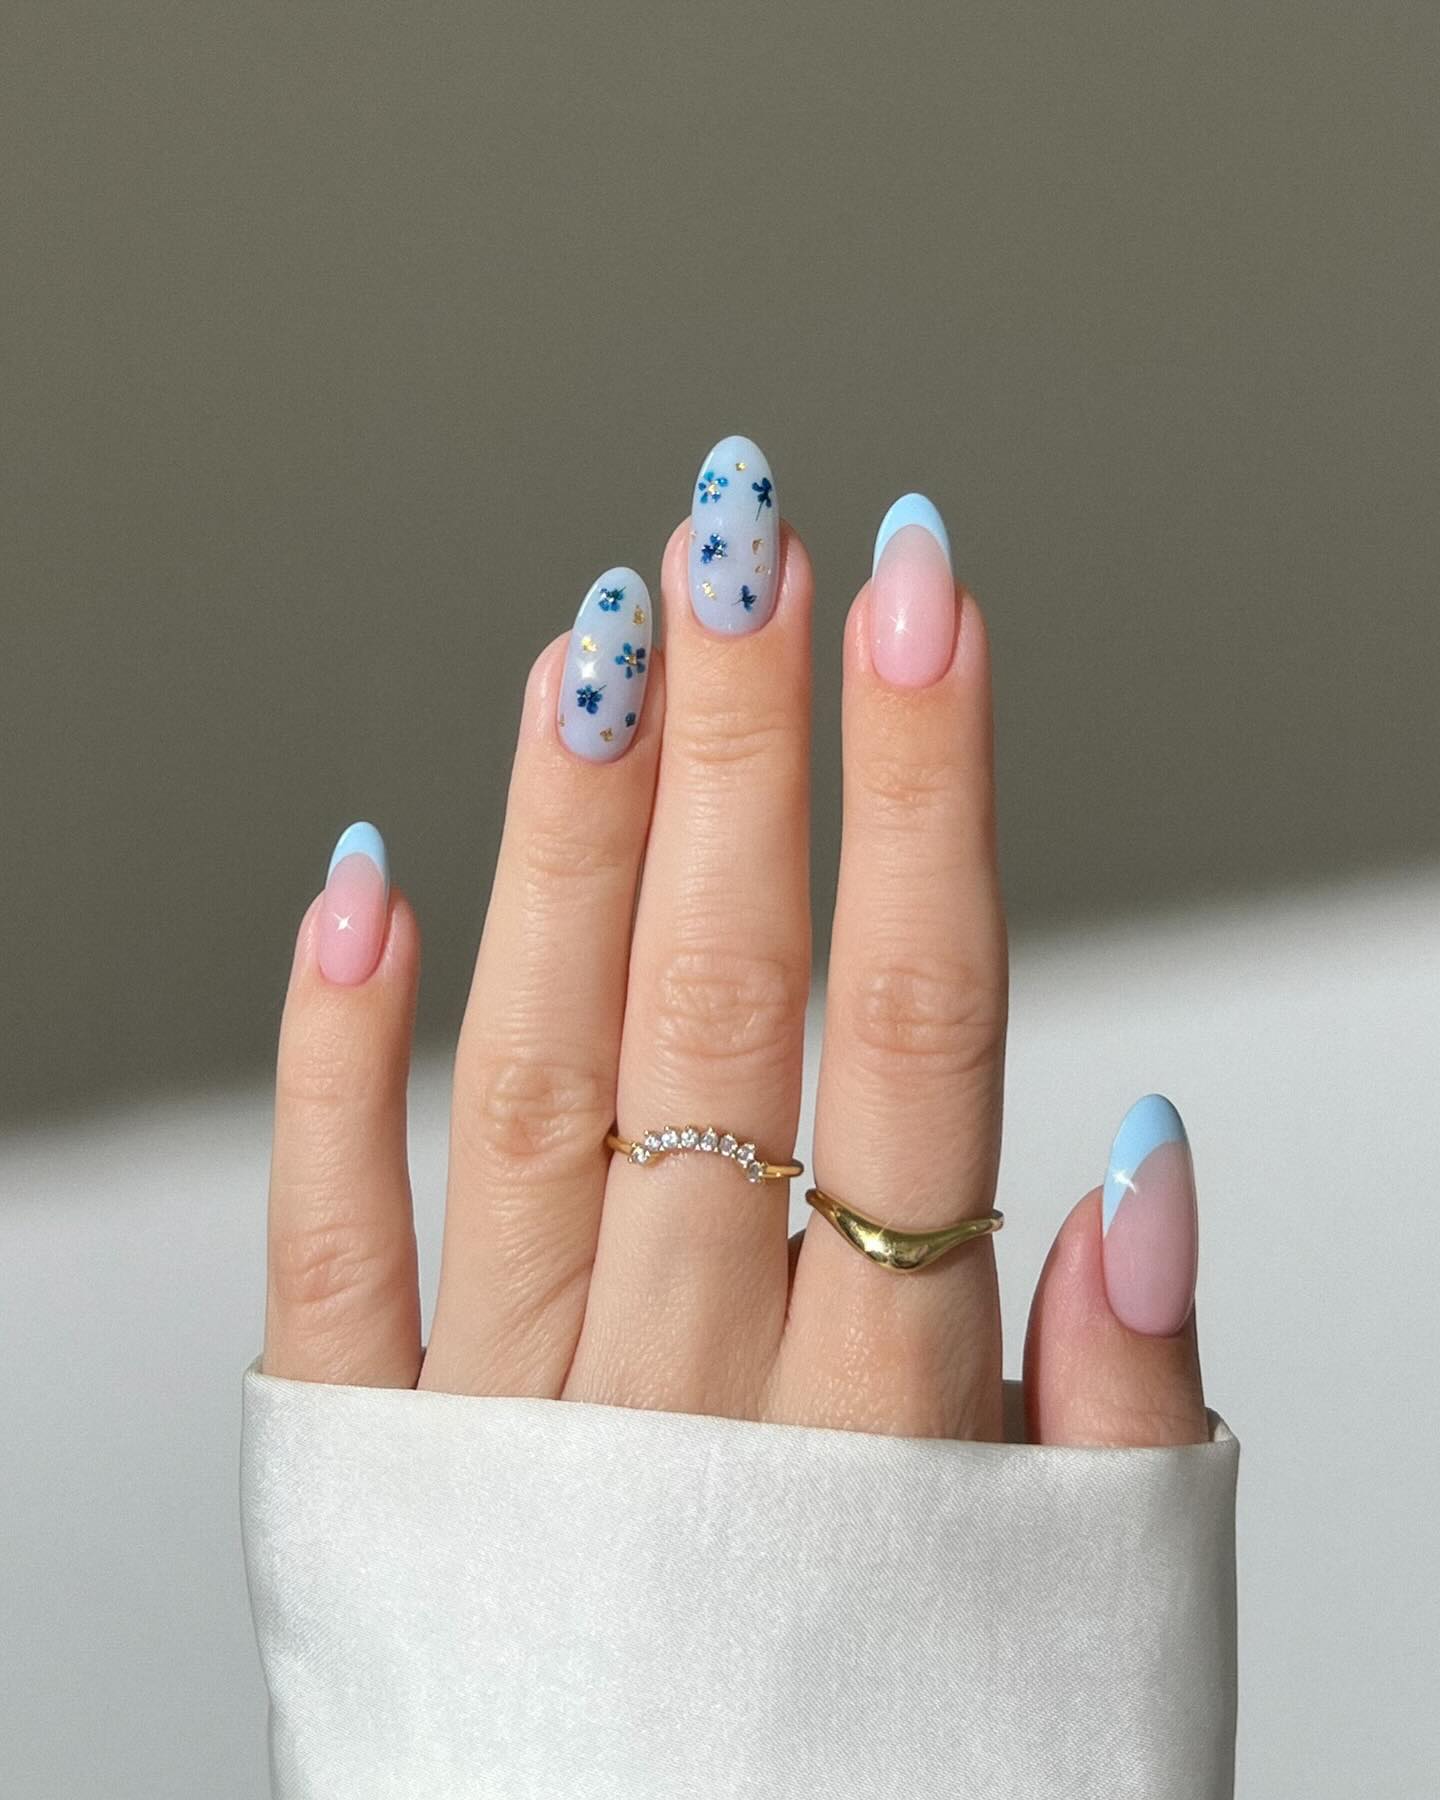 100+ Short Nail Designs You’ll Want To Try This Year images 7